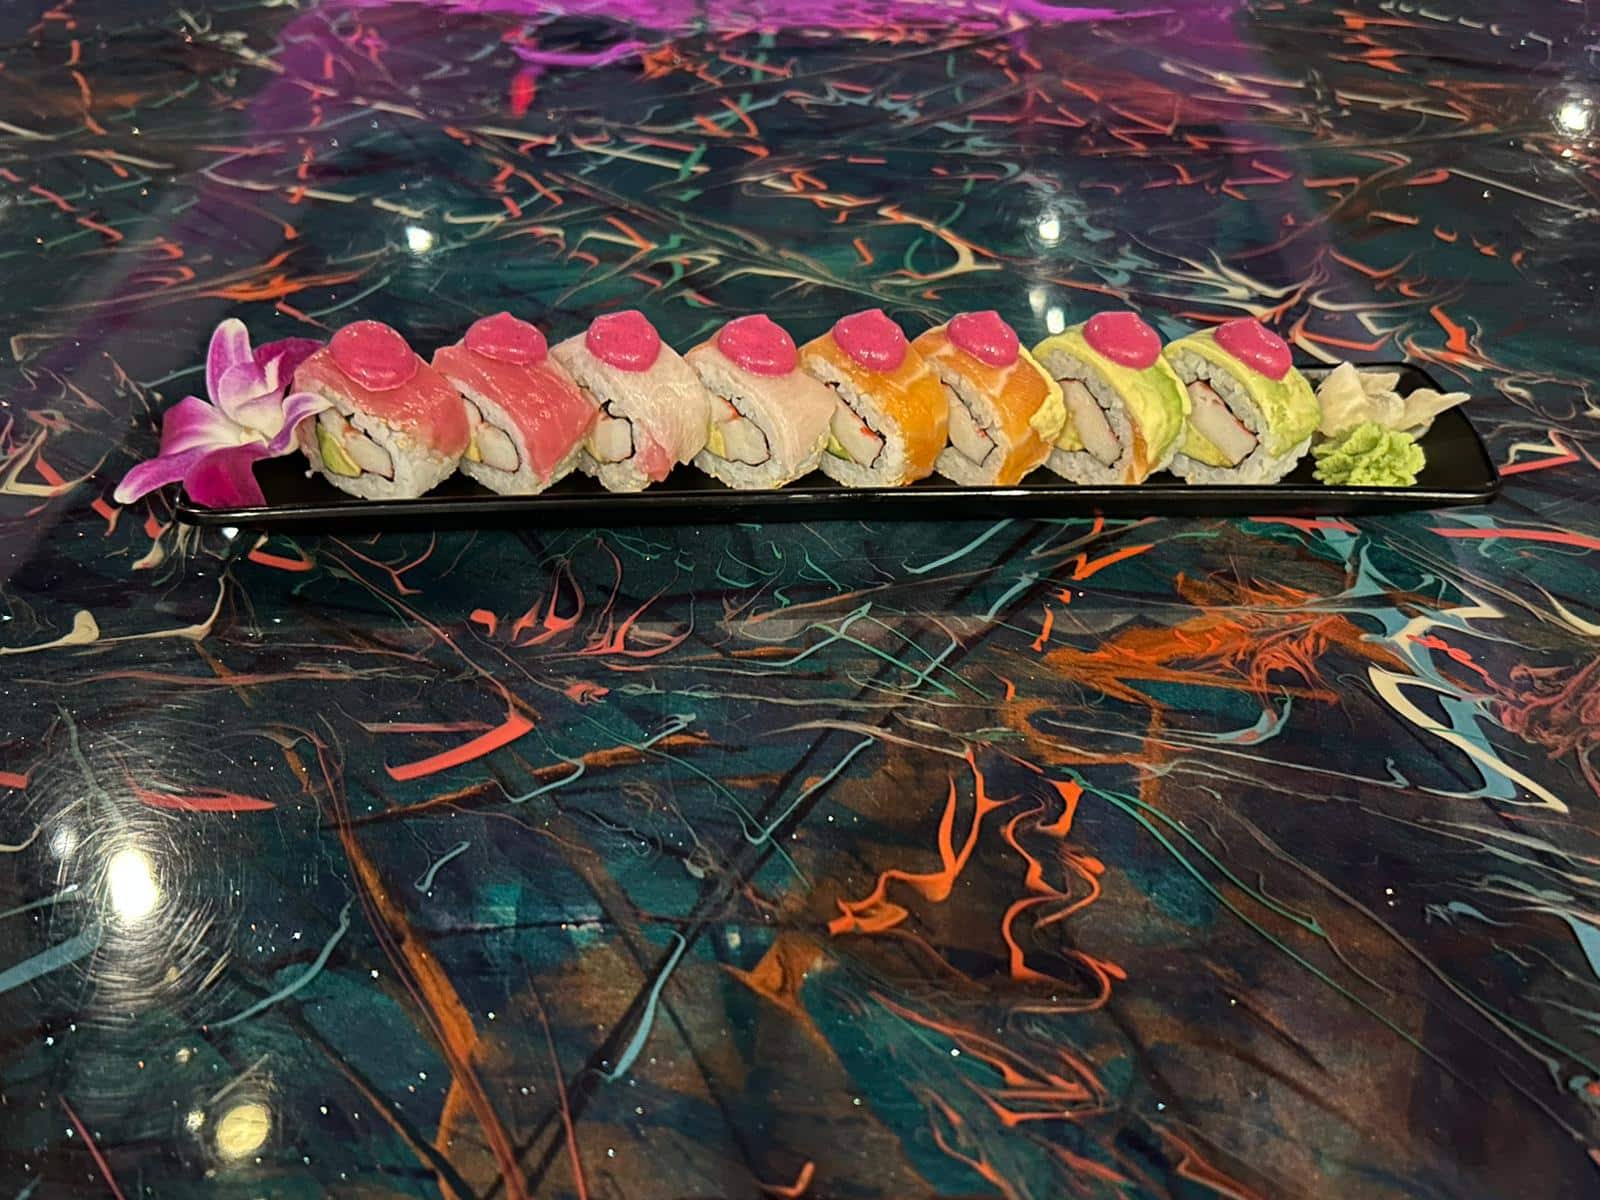 Rainbow Roll at KAO Sushi & Grill